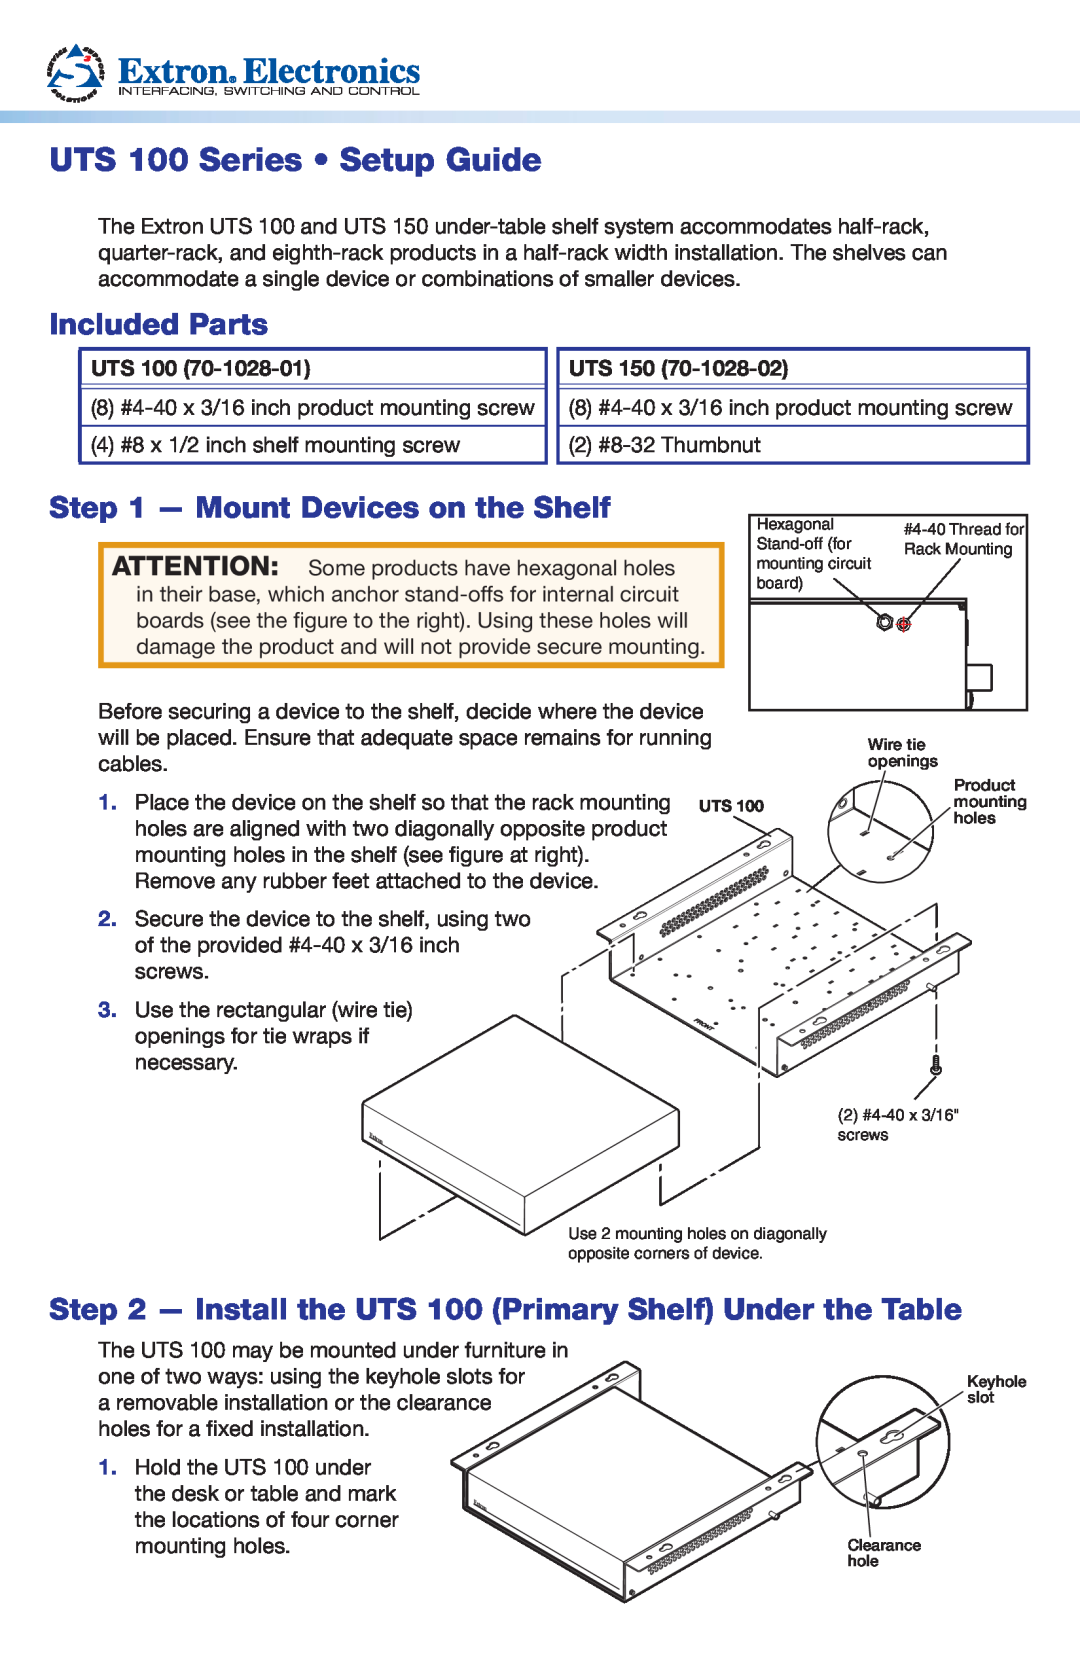 Extron electronic 150 setup guide Included Parts, Mount Devices on the Shelf, UTS 100 Series Setup Guide, Uts 